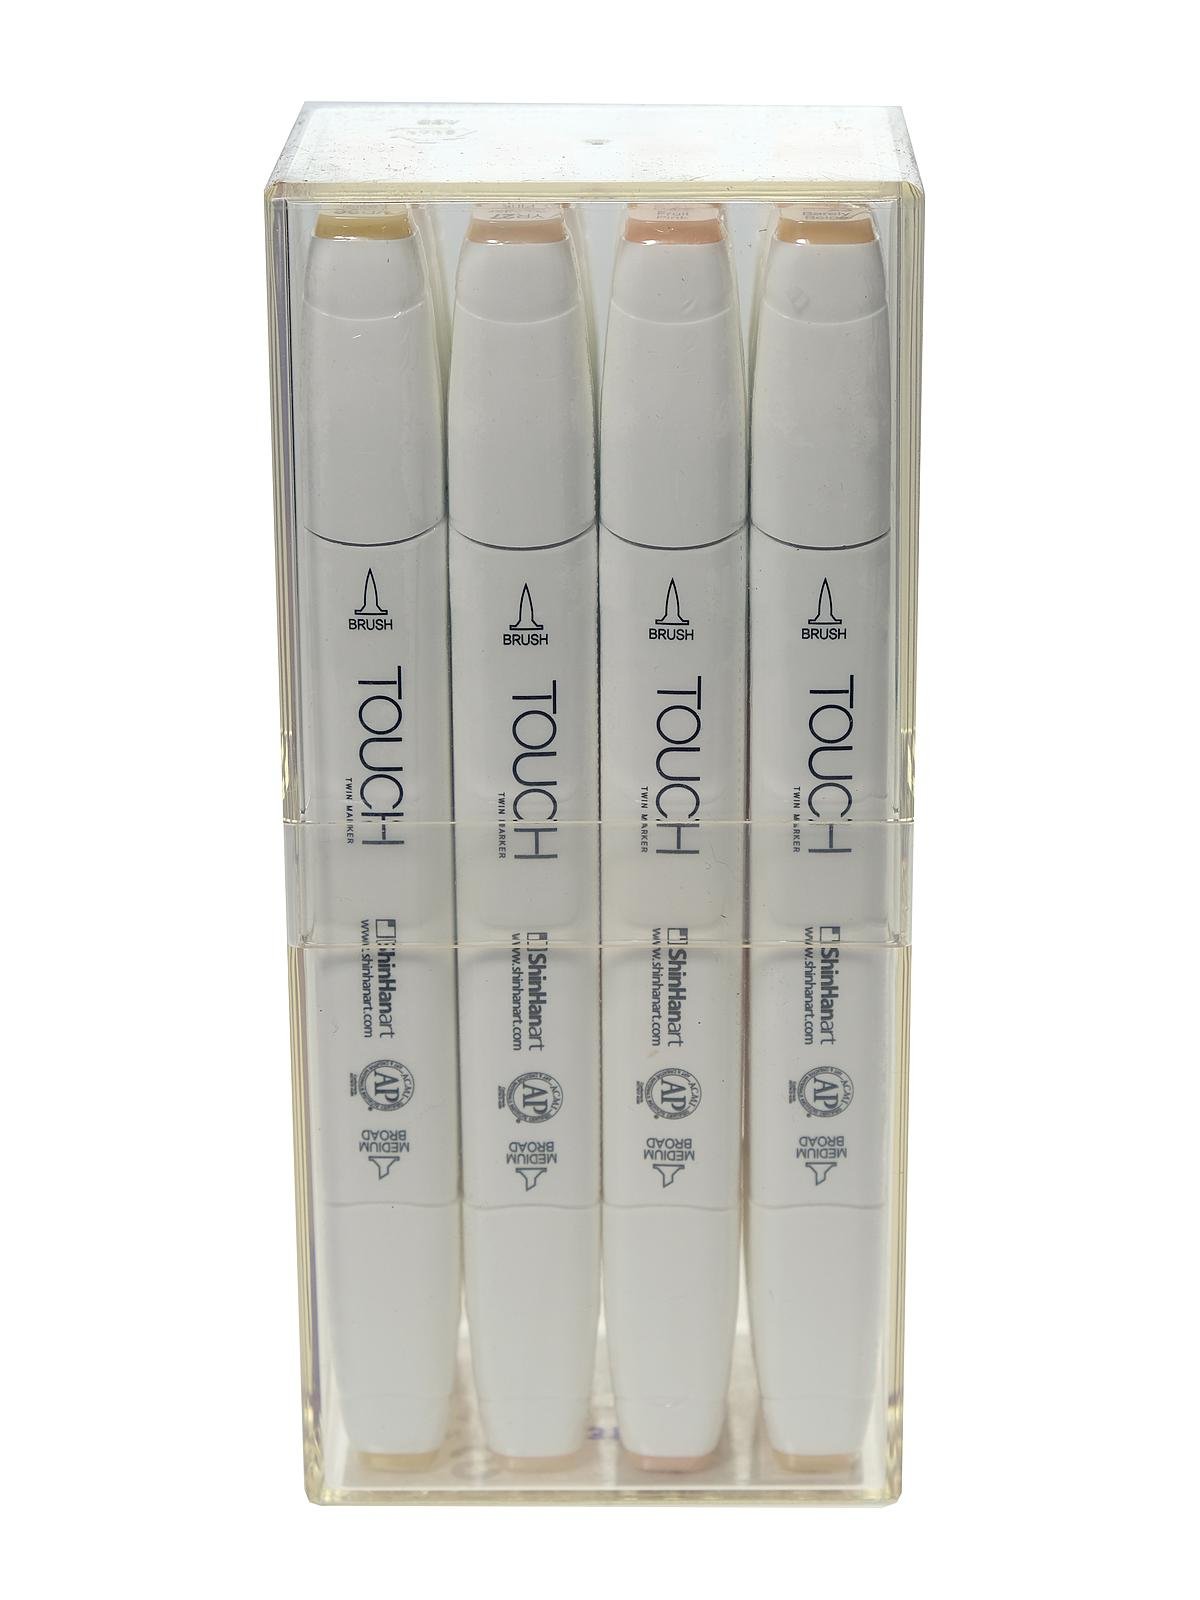 Shinhan Touch Twin Markers for Landscapes - The Fearless Brush